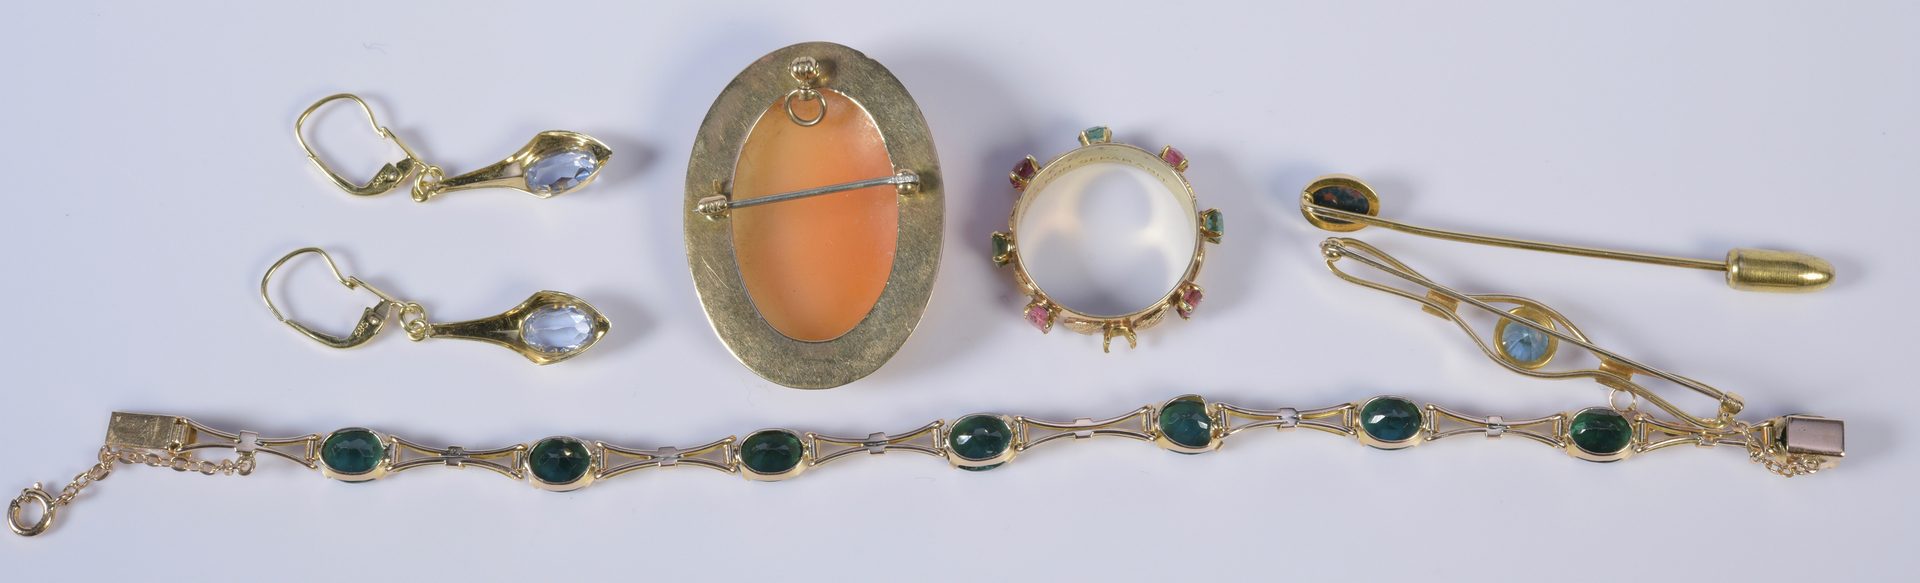 Lot 802: Group of Vintage Jewelry, 12 items